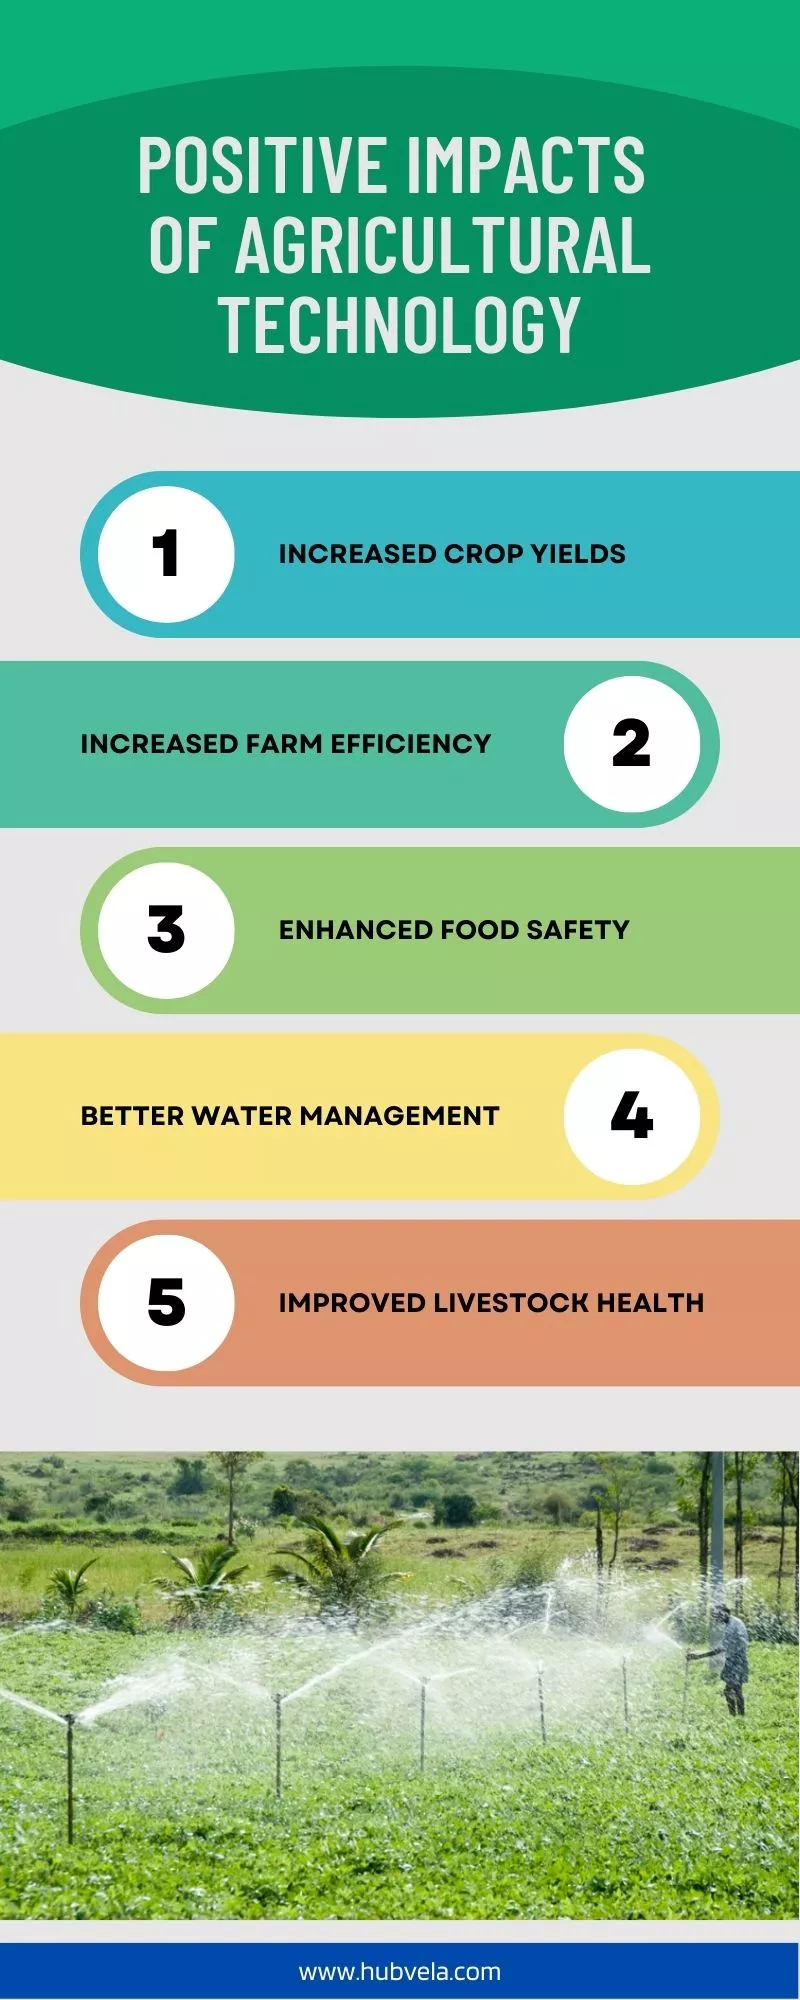 Positive Impacts of Agricultural Technology infographic